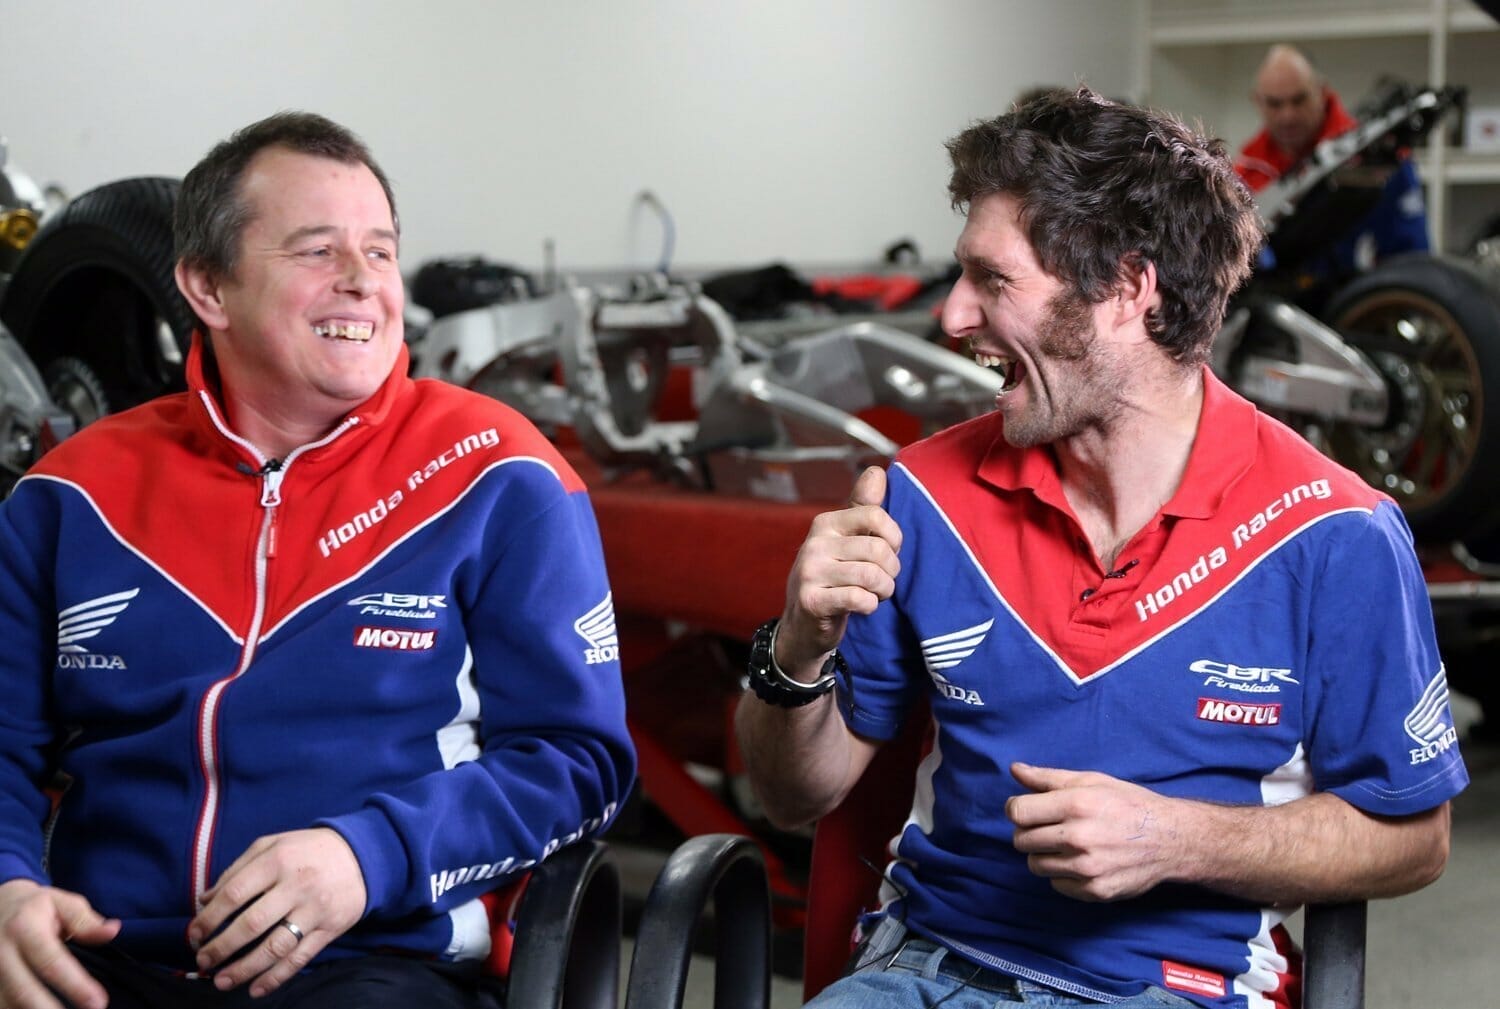 John McGuinness reports from the hospital